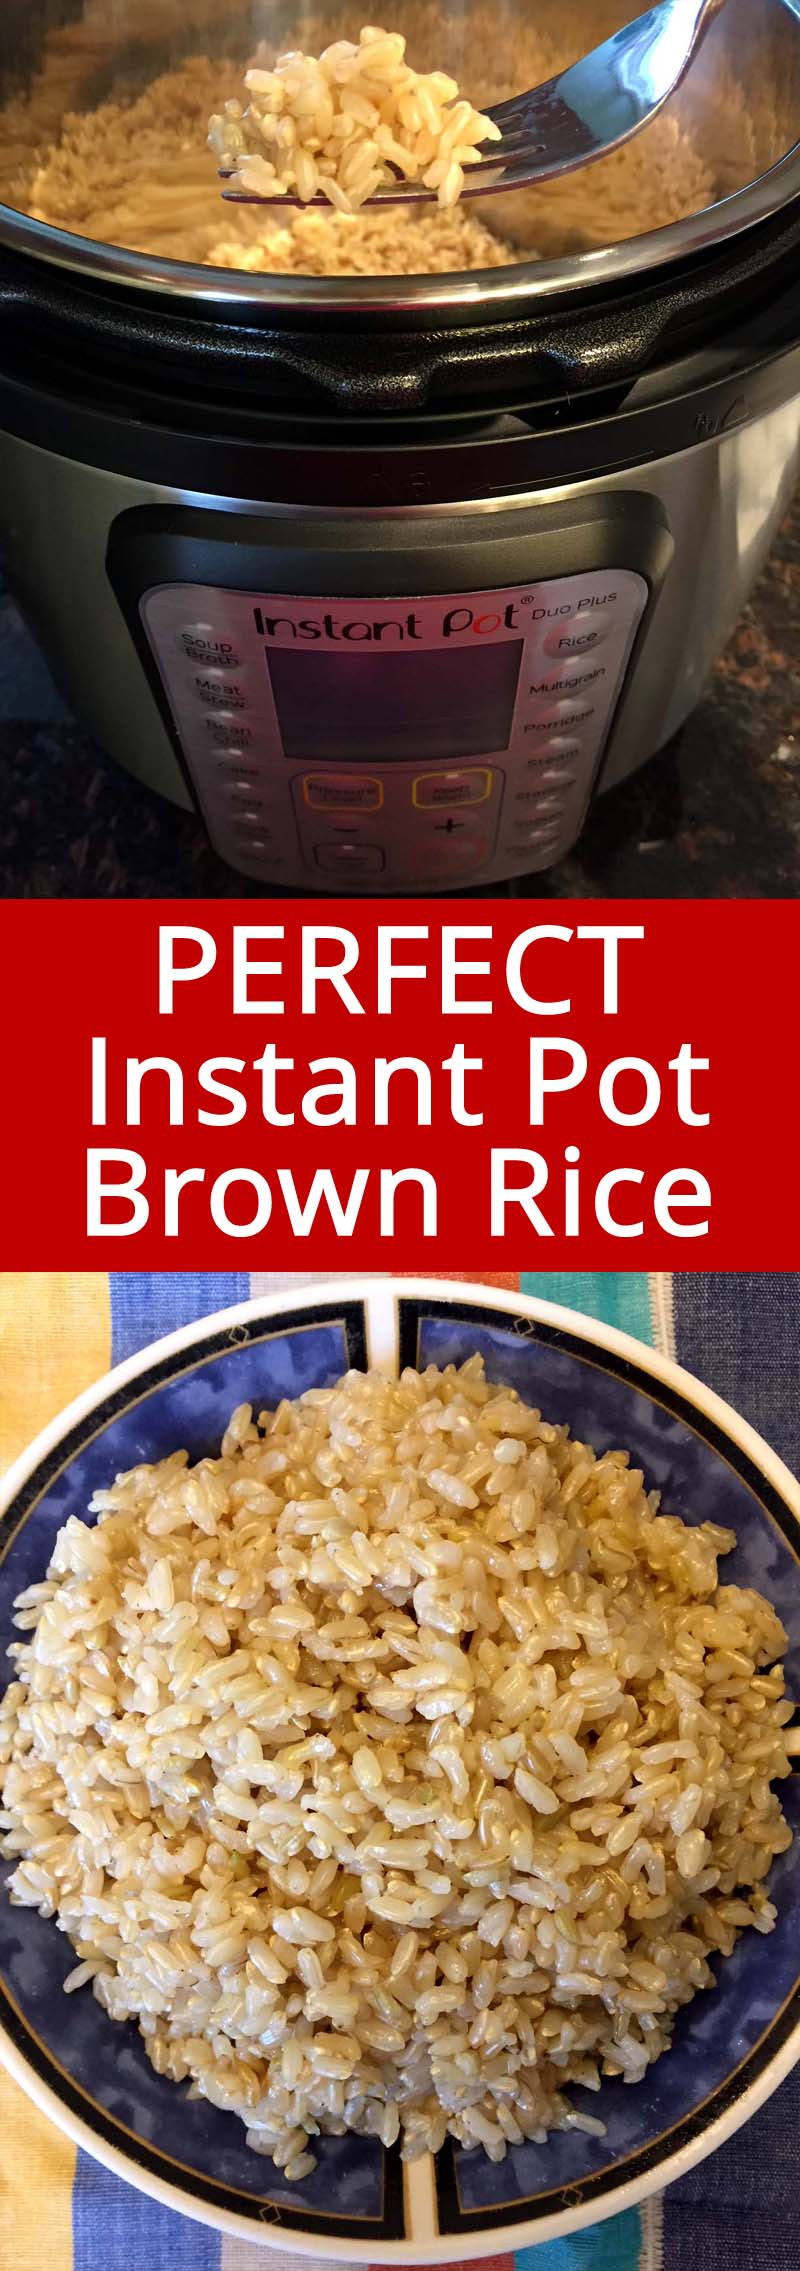 Brown Rice Instant Pot Recipe
 Instant Pot Brown Rice – How To Cook Brown Rice In A